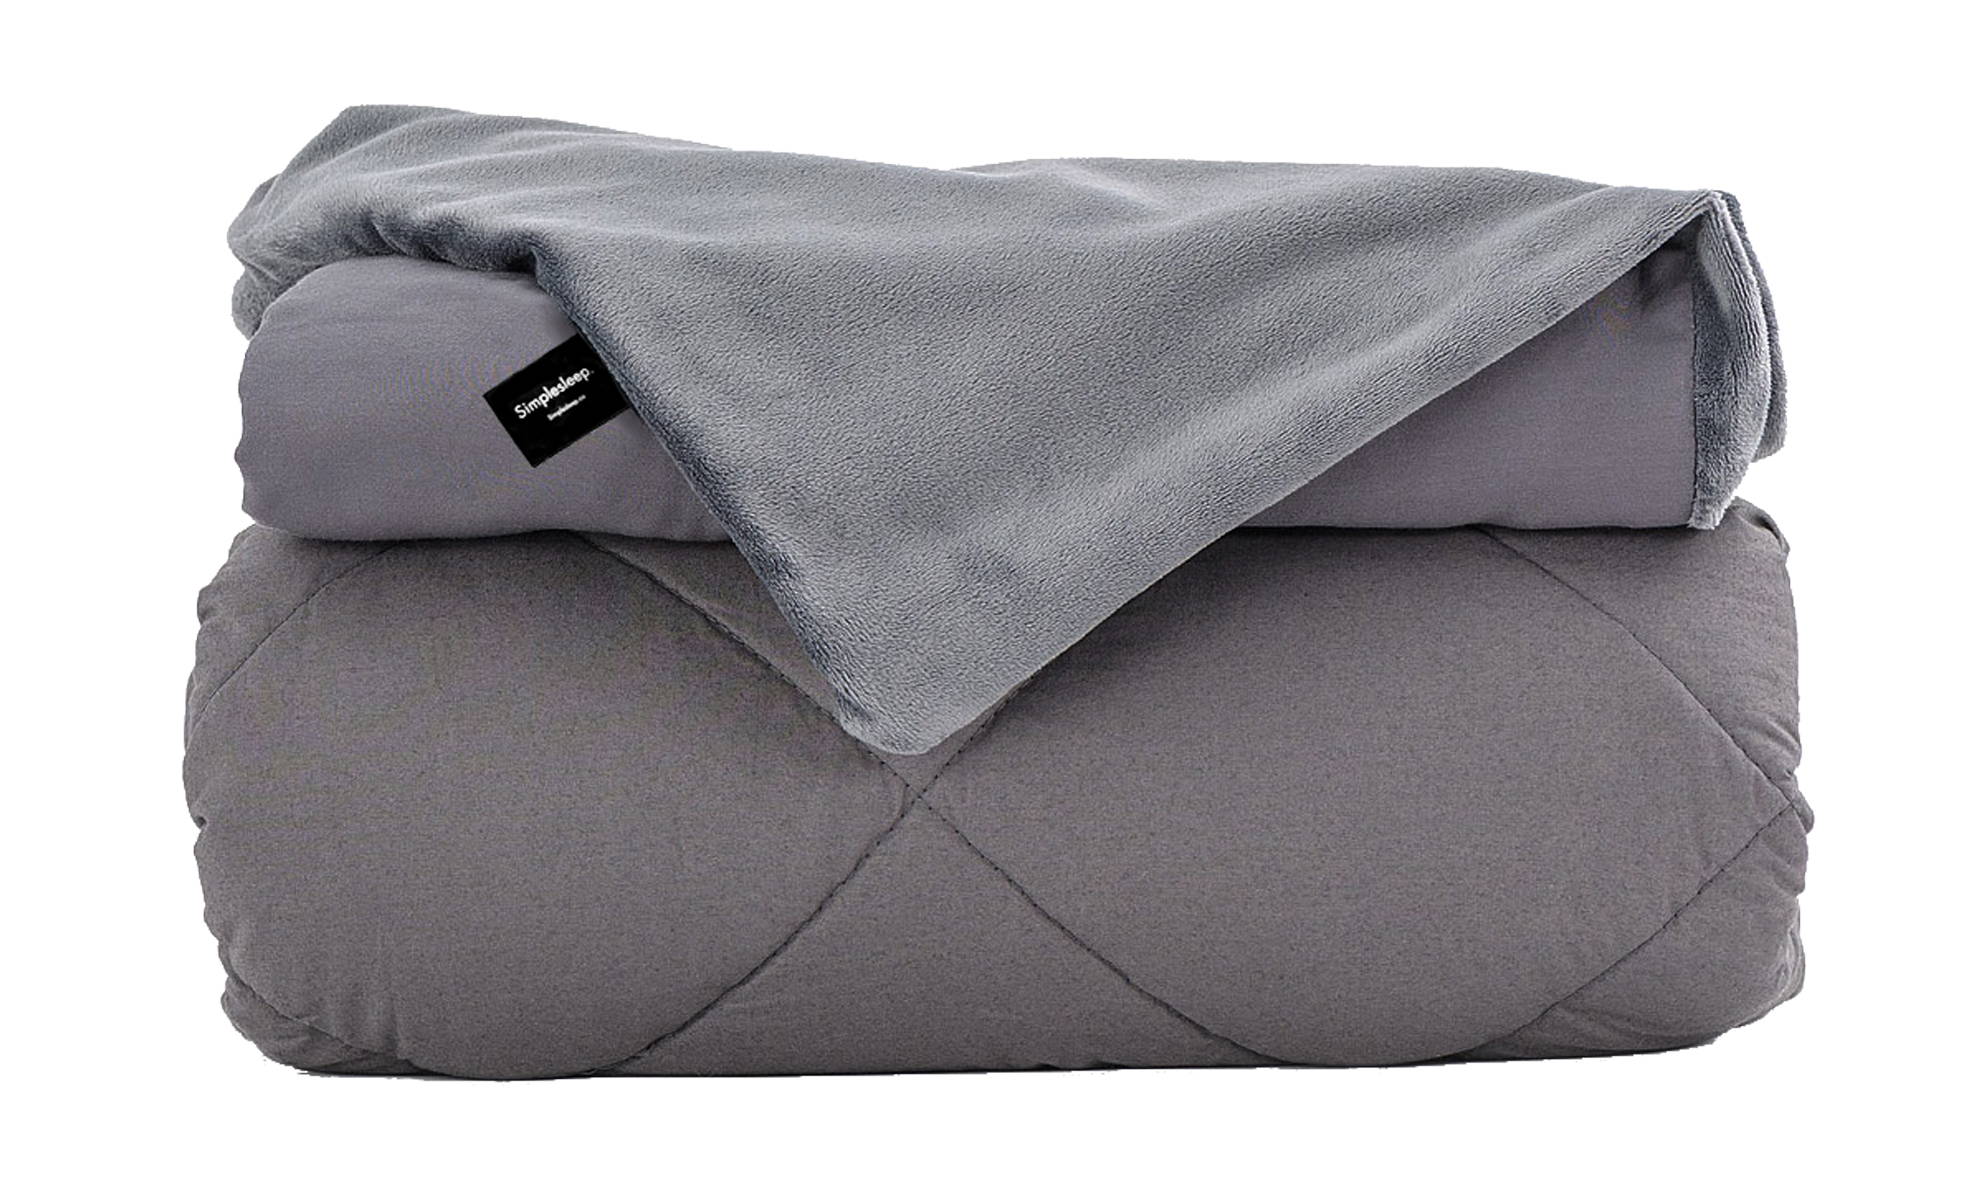 Simplesleep Weighted Blanket and Removable Cover